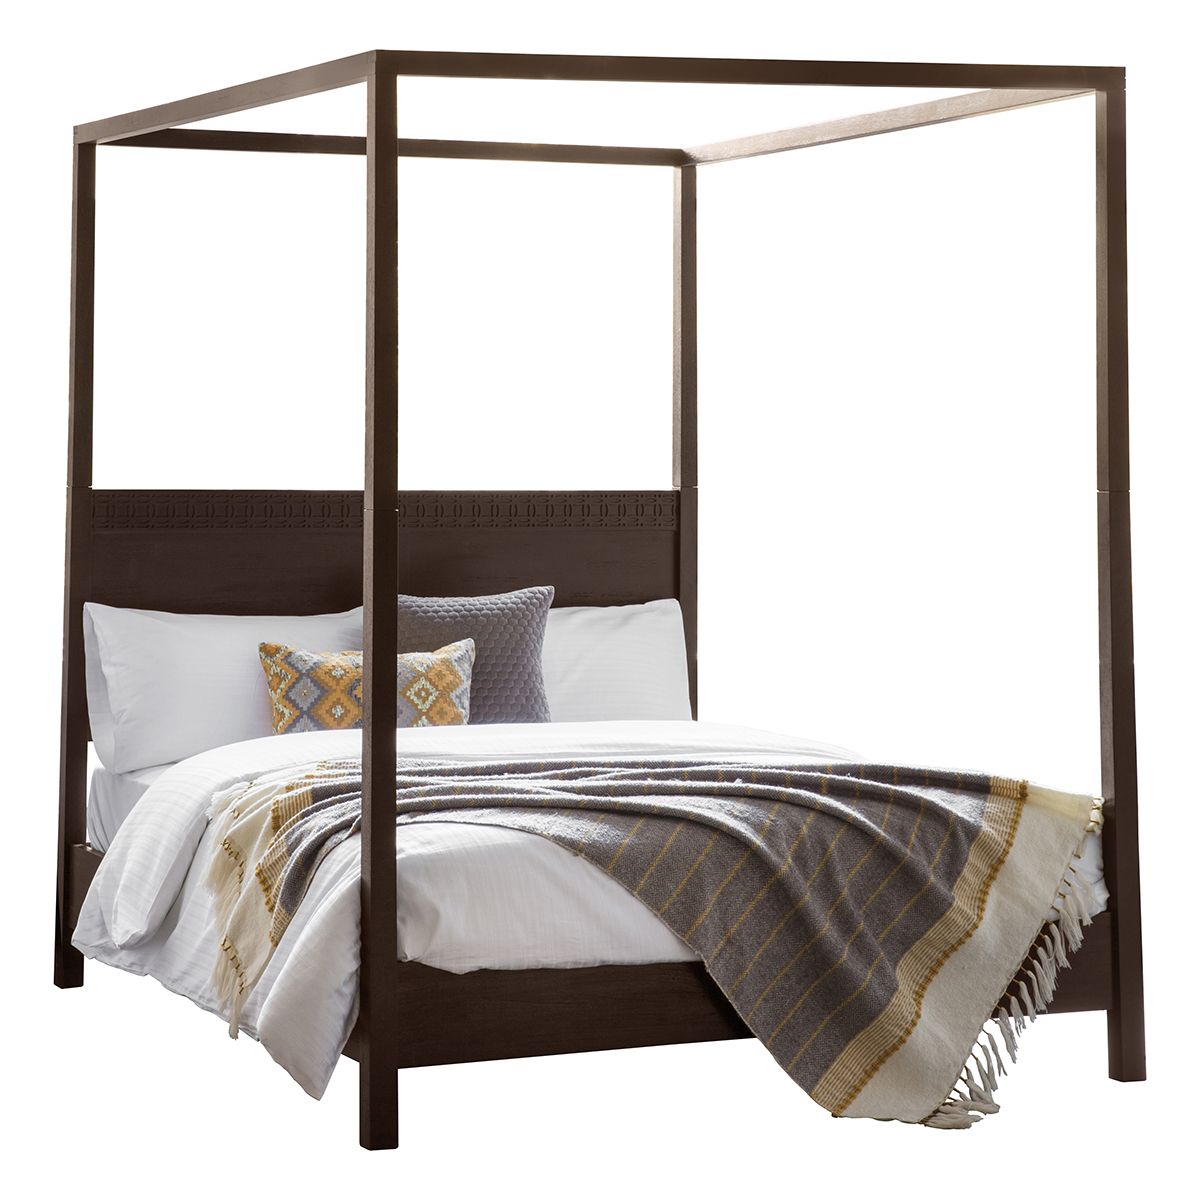 Sia Brown 4 Poster Bed Frame - King Size ( 150 x 200)